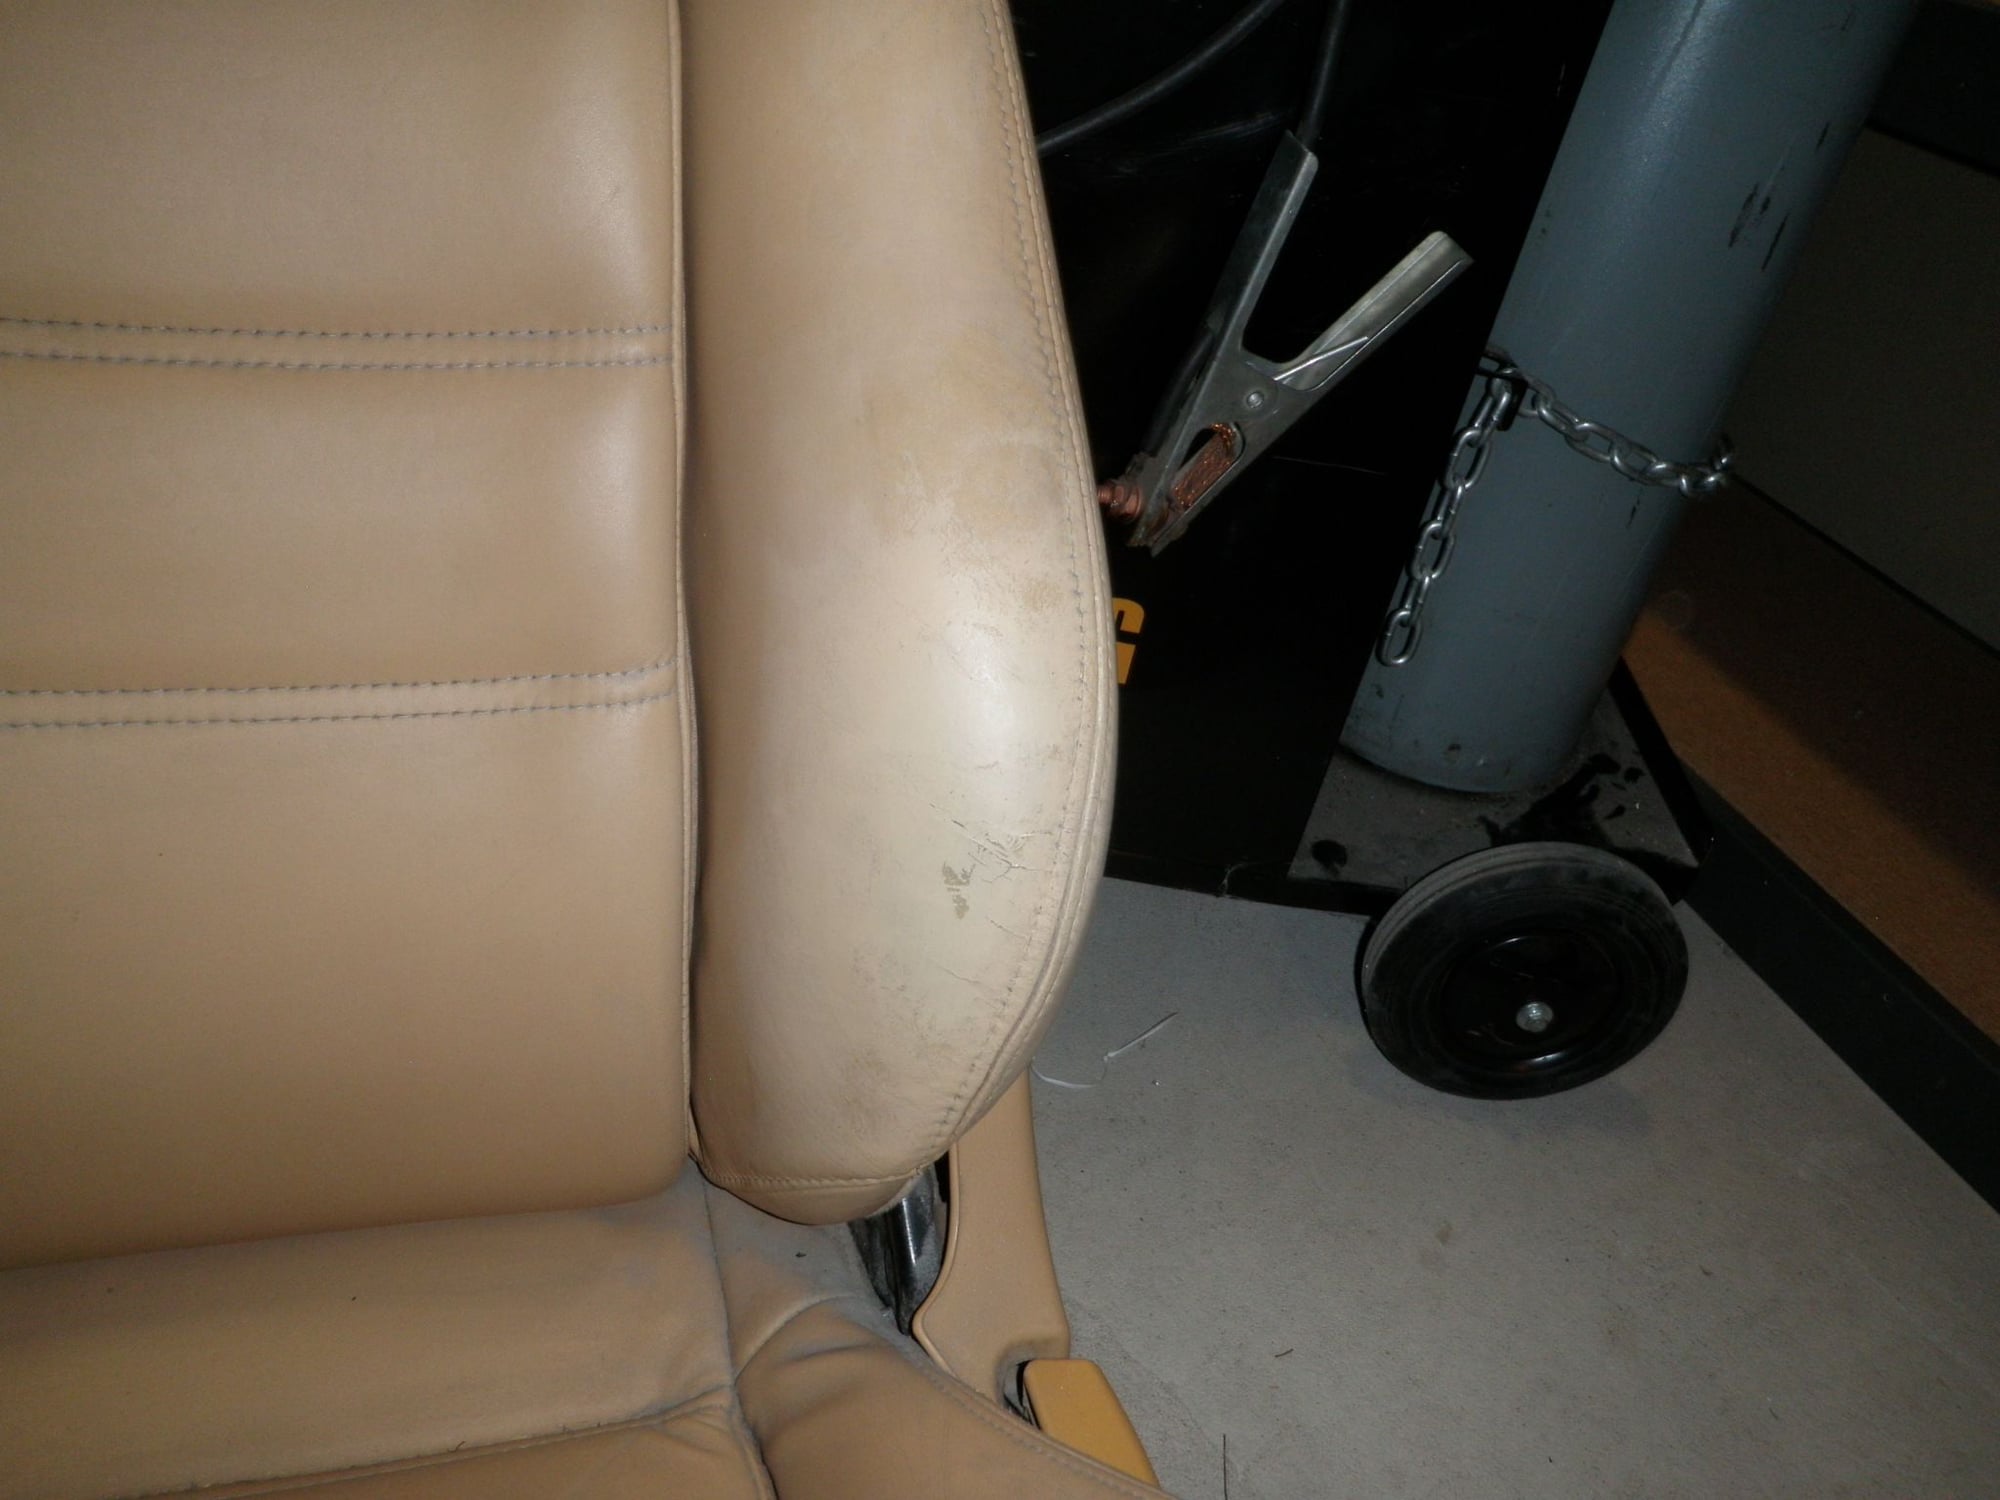 1994 Mazda RX-7 - FD Tan leather seats - Interior/Upholstery - $400 - Union City, CA 94587, United States